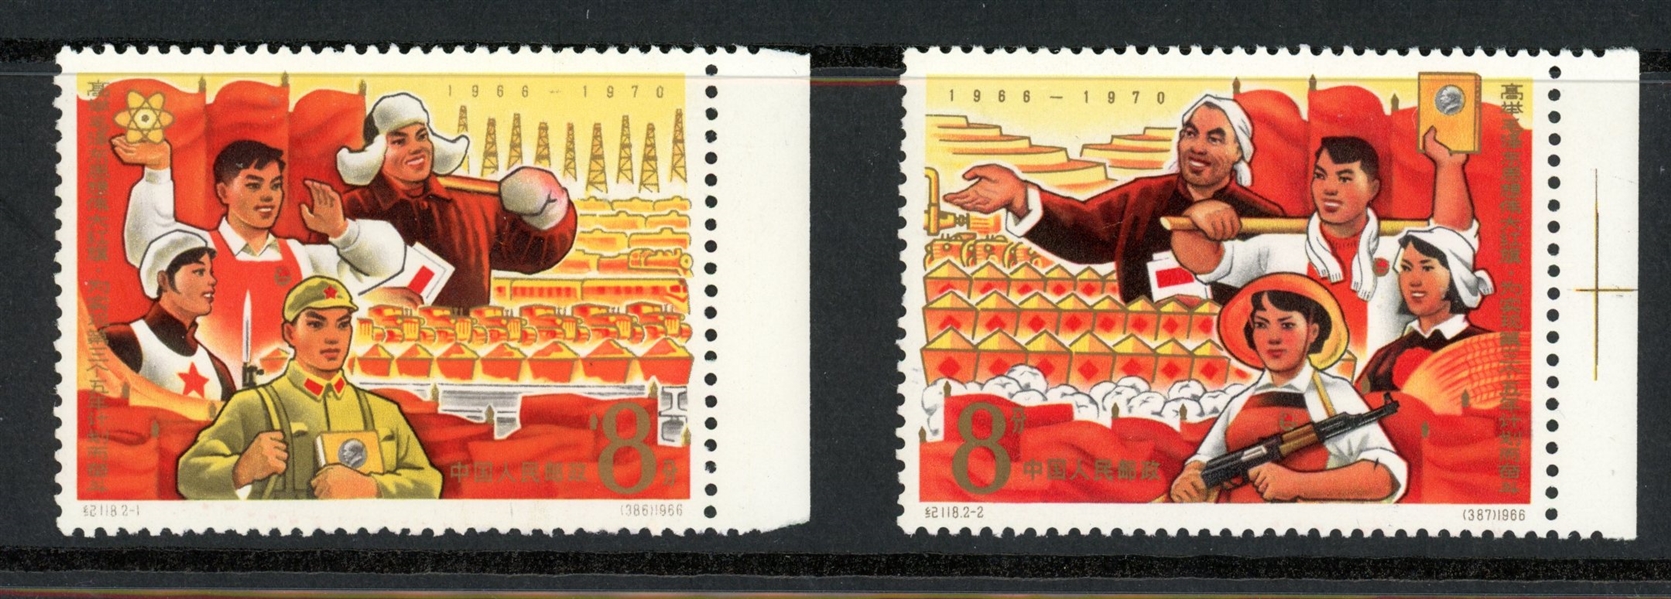 People's Republic of China Scott 936-937 MLH Complete Set - 1967 3rd 5-Year Plan (SCV $180)